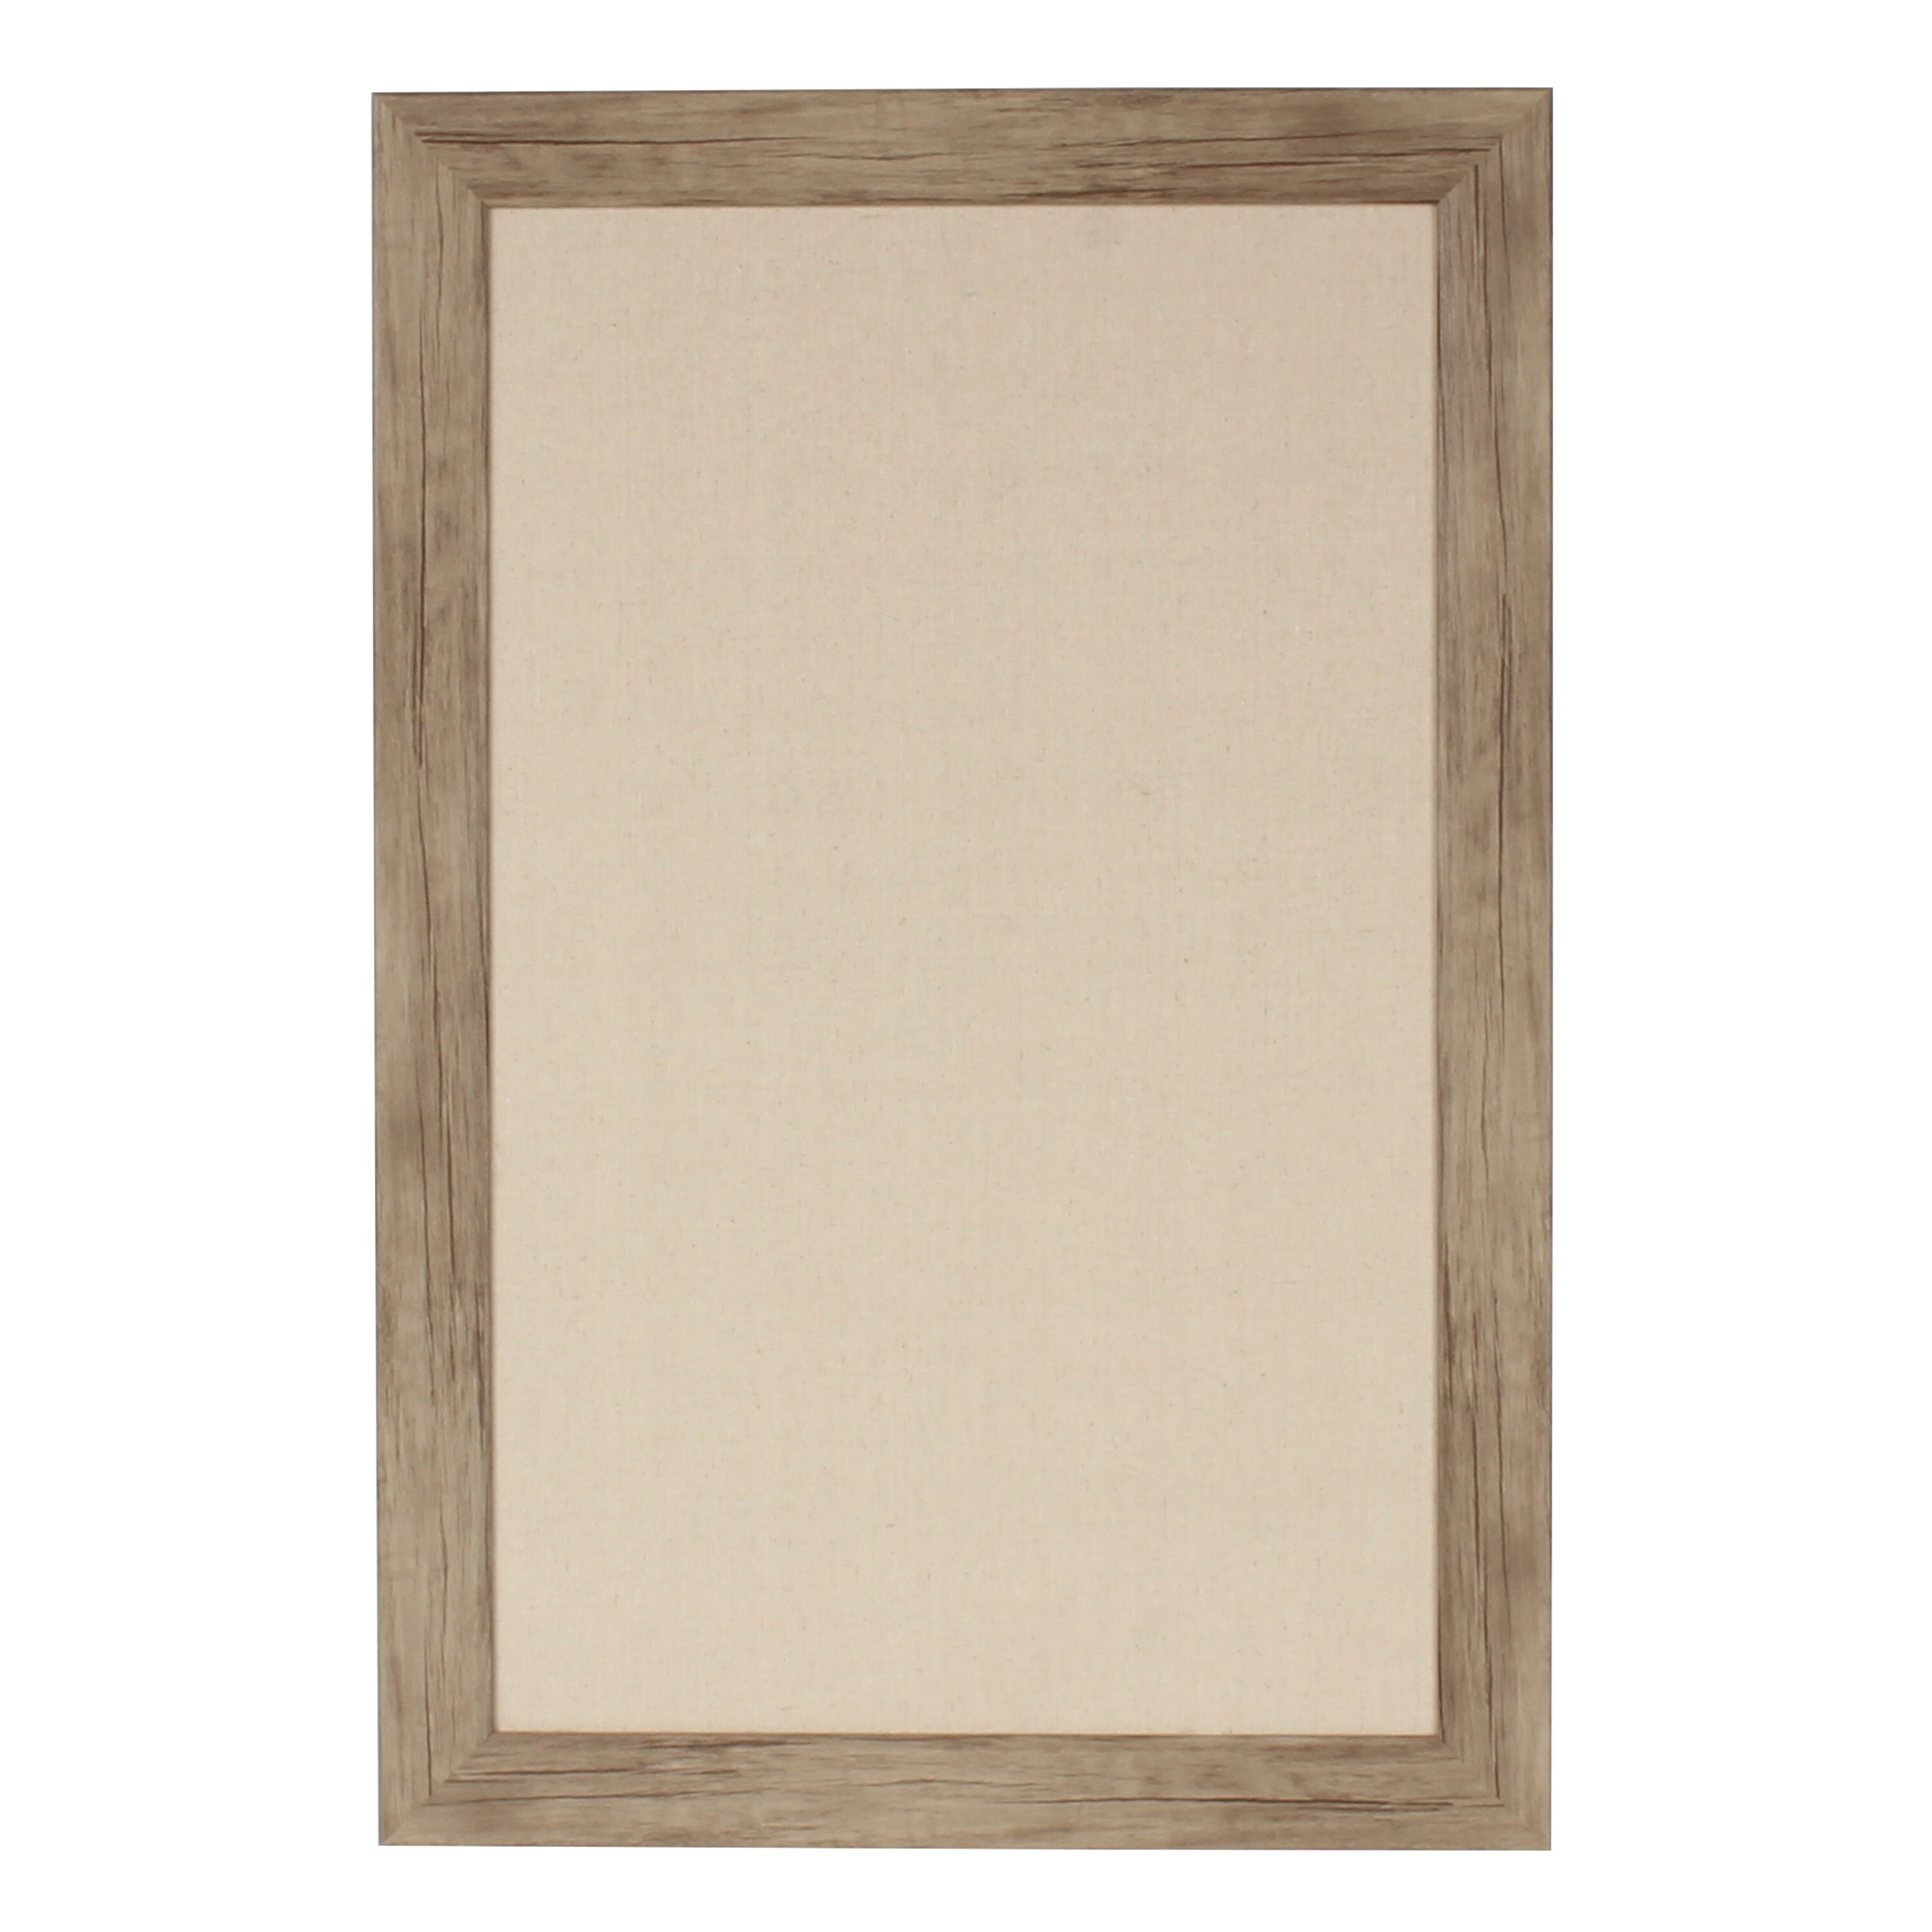 27 Inch Tall Memo Boards at Lowes.com